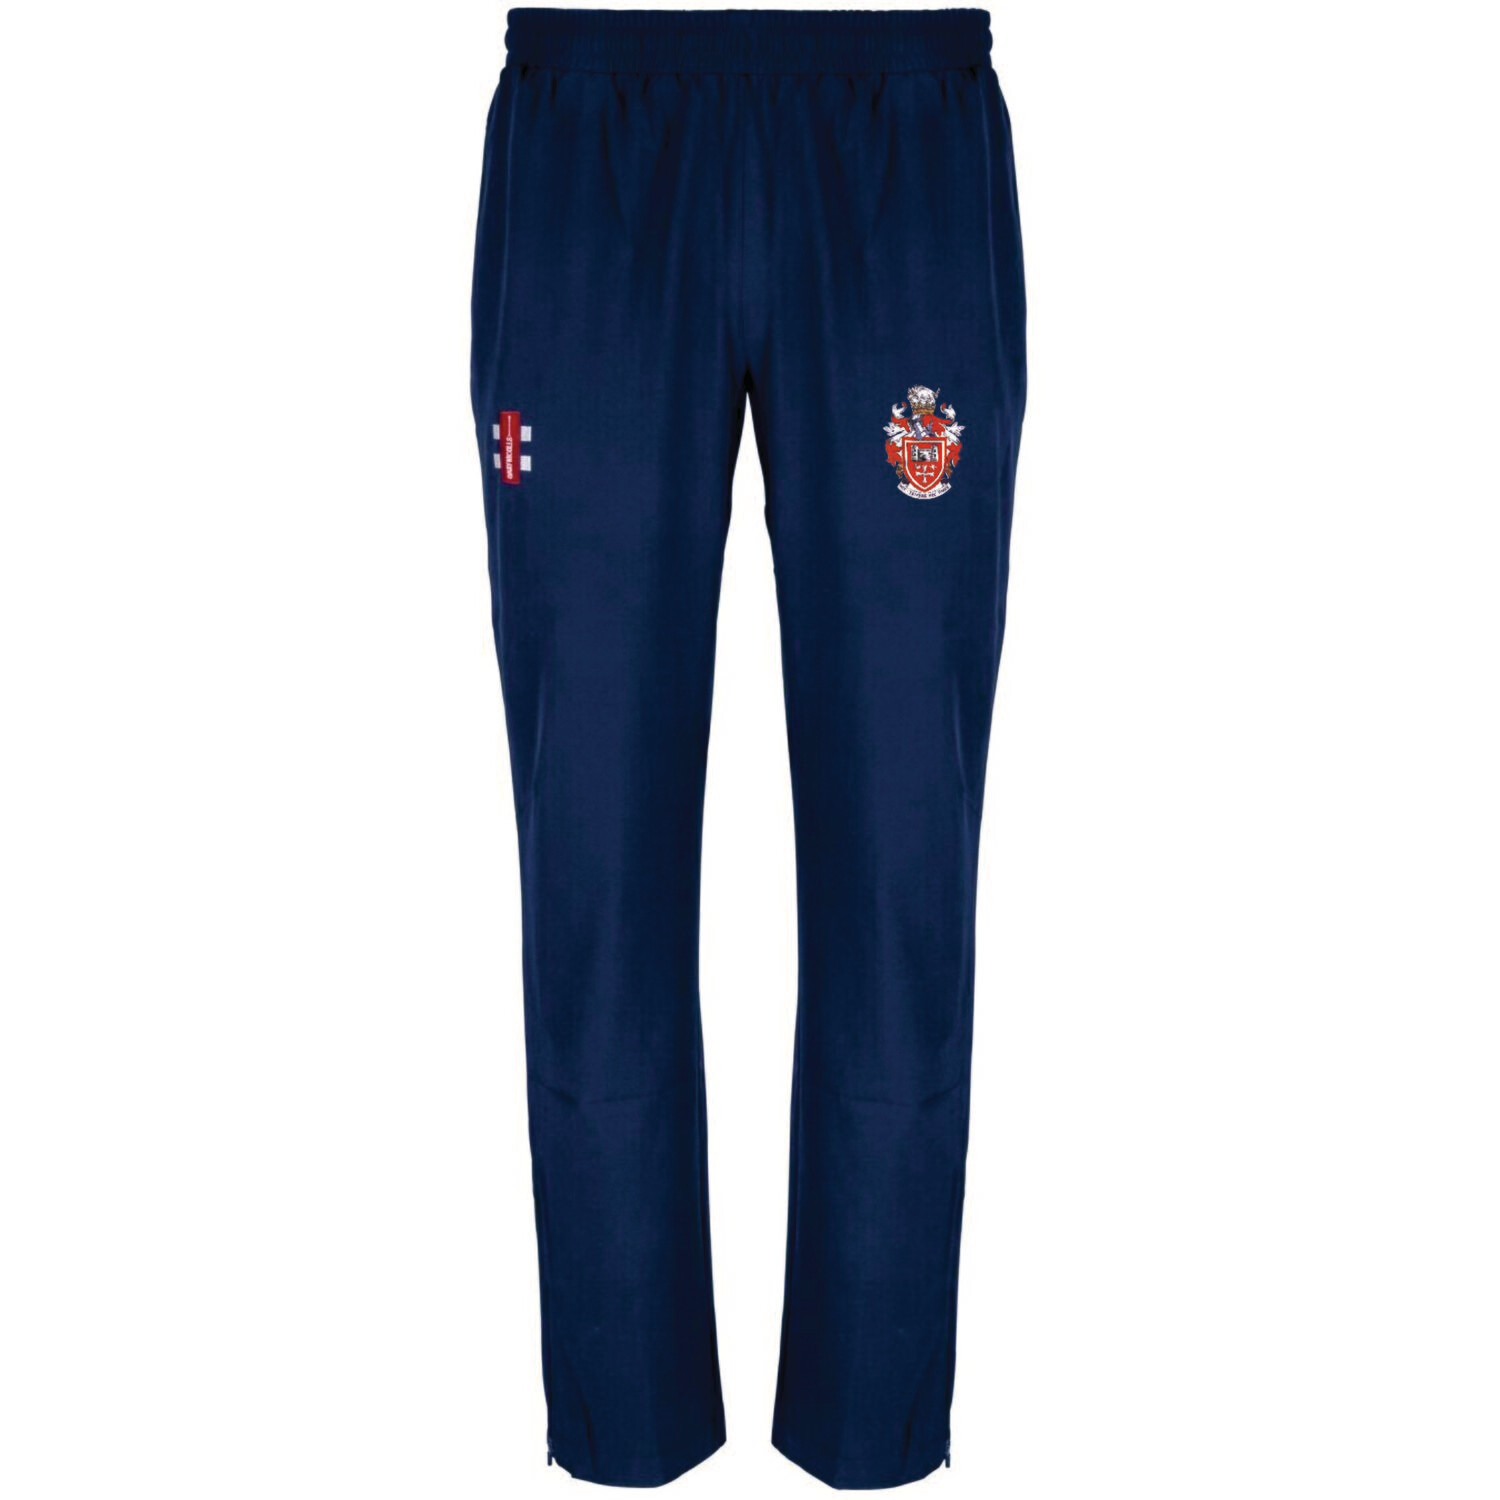 Whitley Bay Velocity Training Trousers